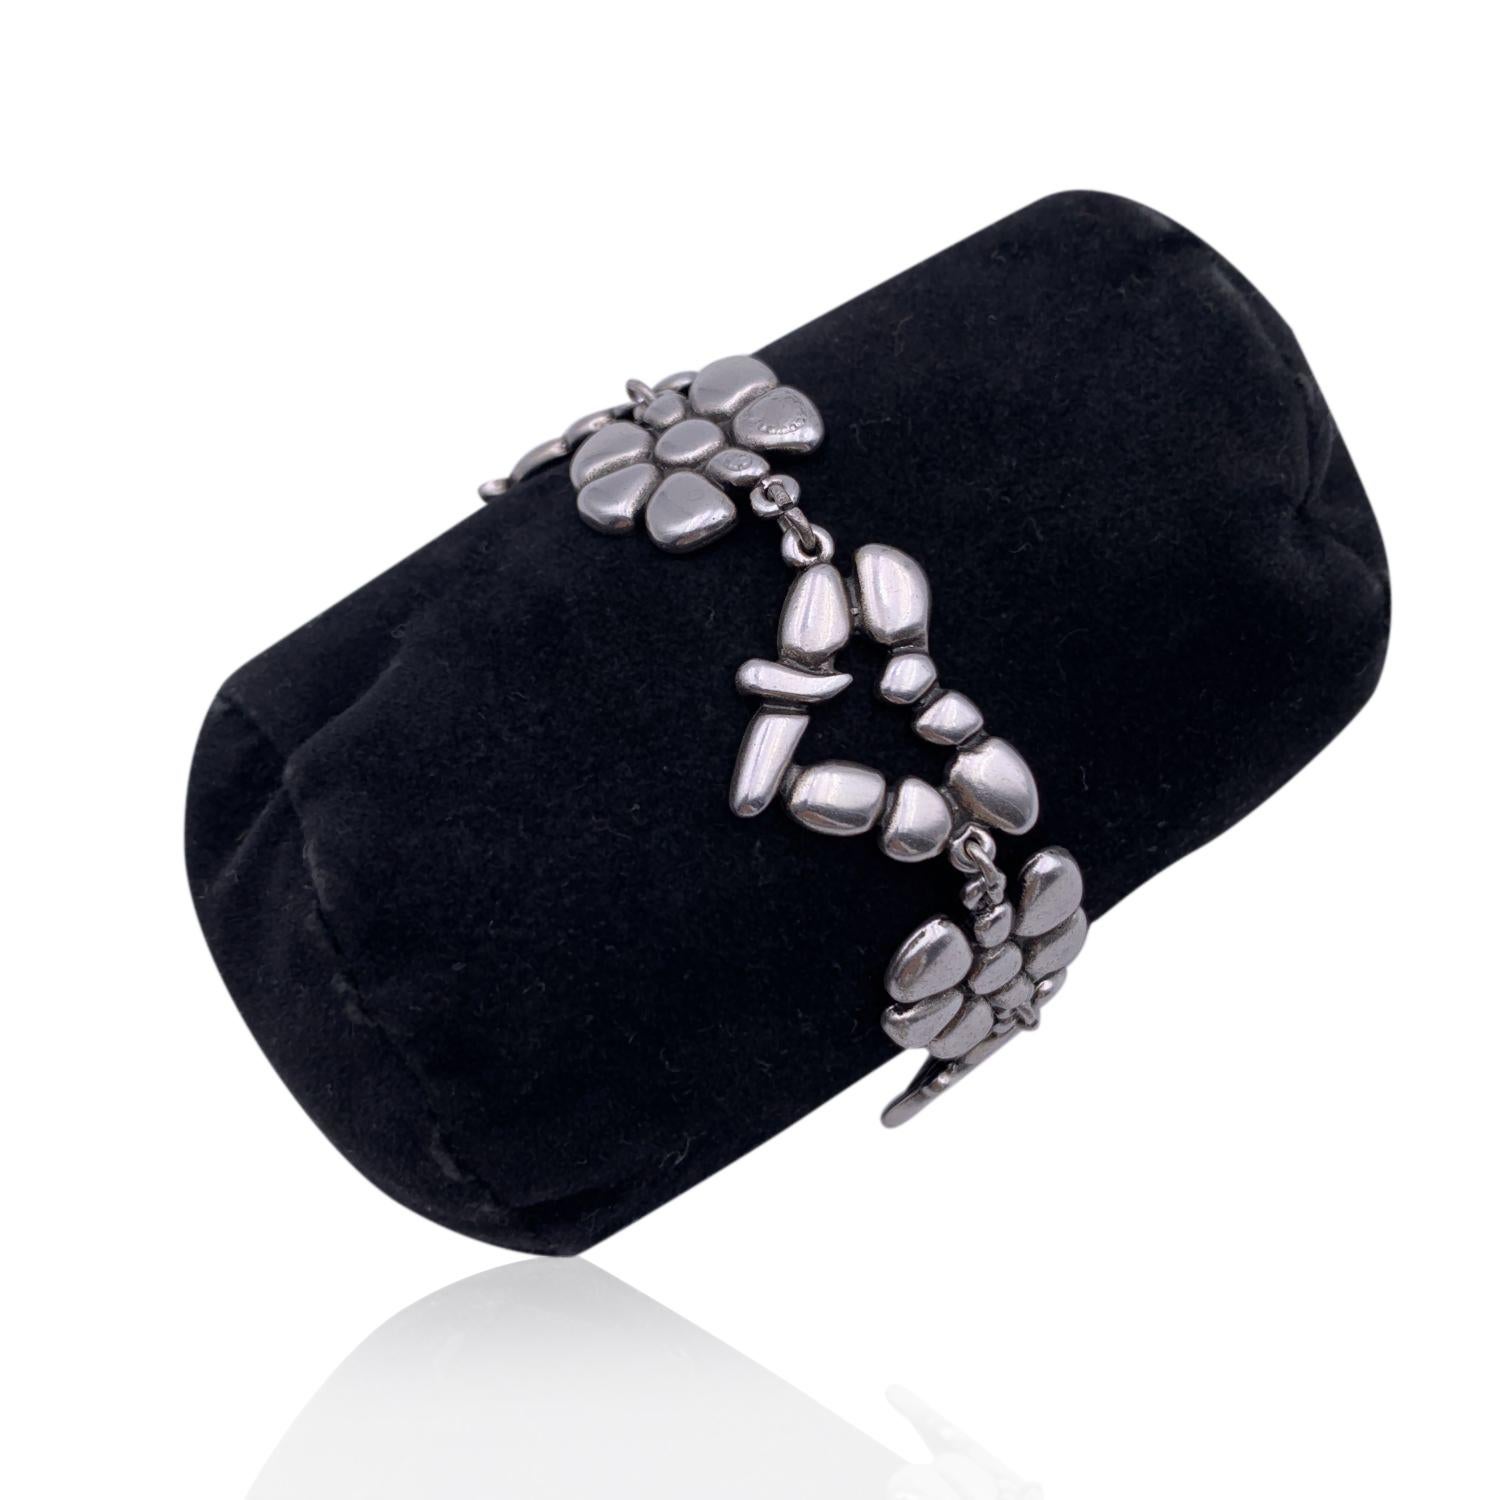 Beautiful bracelet by Christian Lacroix, from the 'Love Story' line. Made in silver-tone metal. Total length: 8 inches - 20.3 cm. Width: 3.4 cm. 'Christian Lacroix' tab at the end of the bracelet

Condition

A+ - MINT

Christian Lacroix box